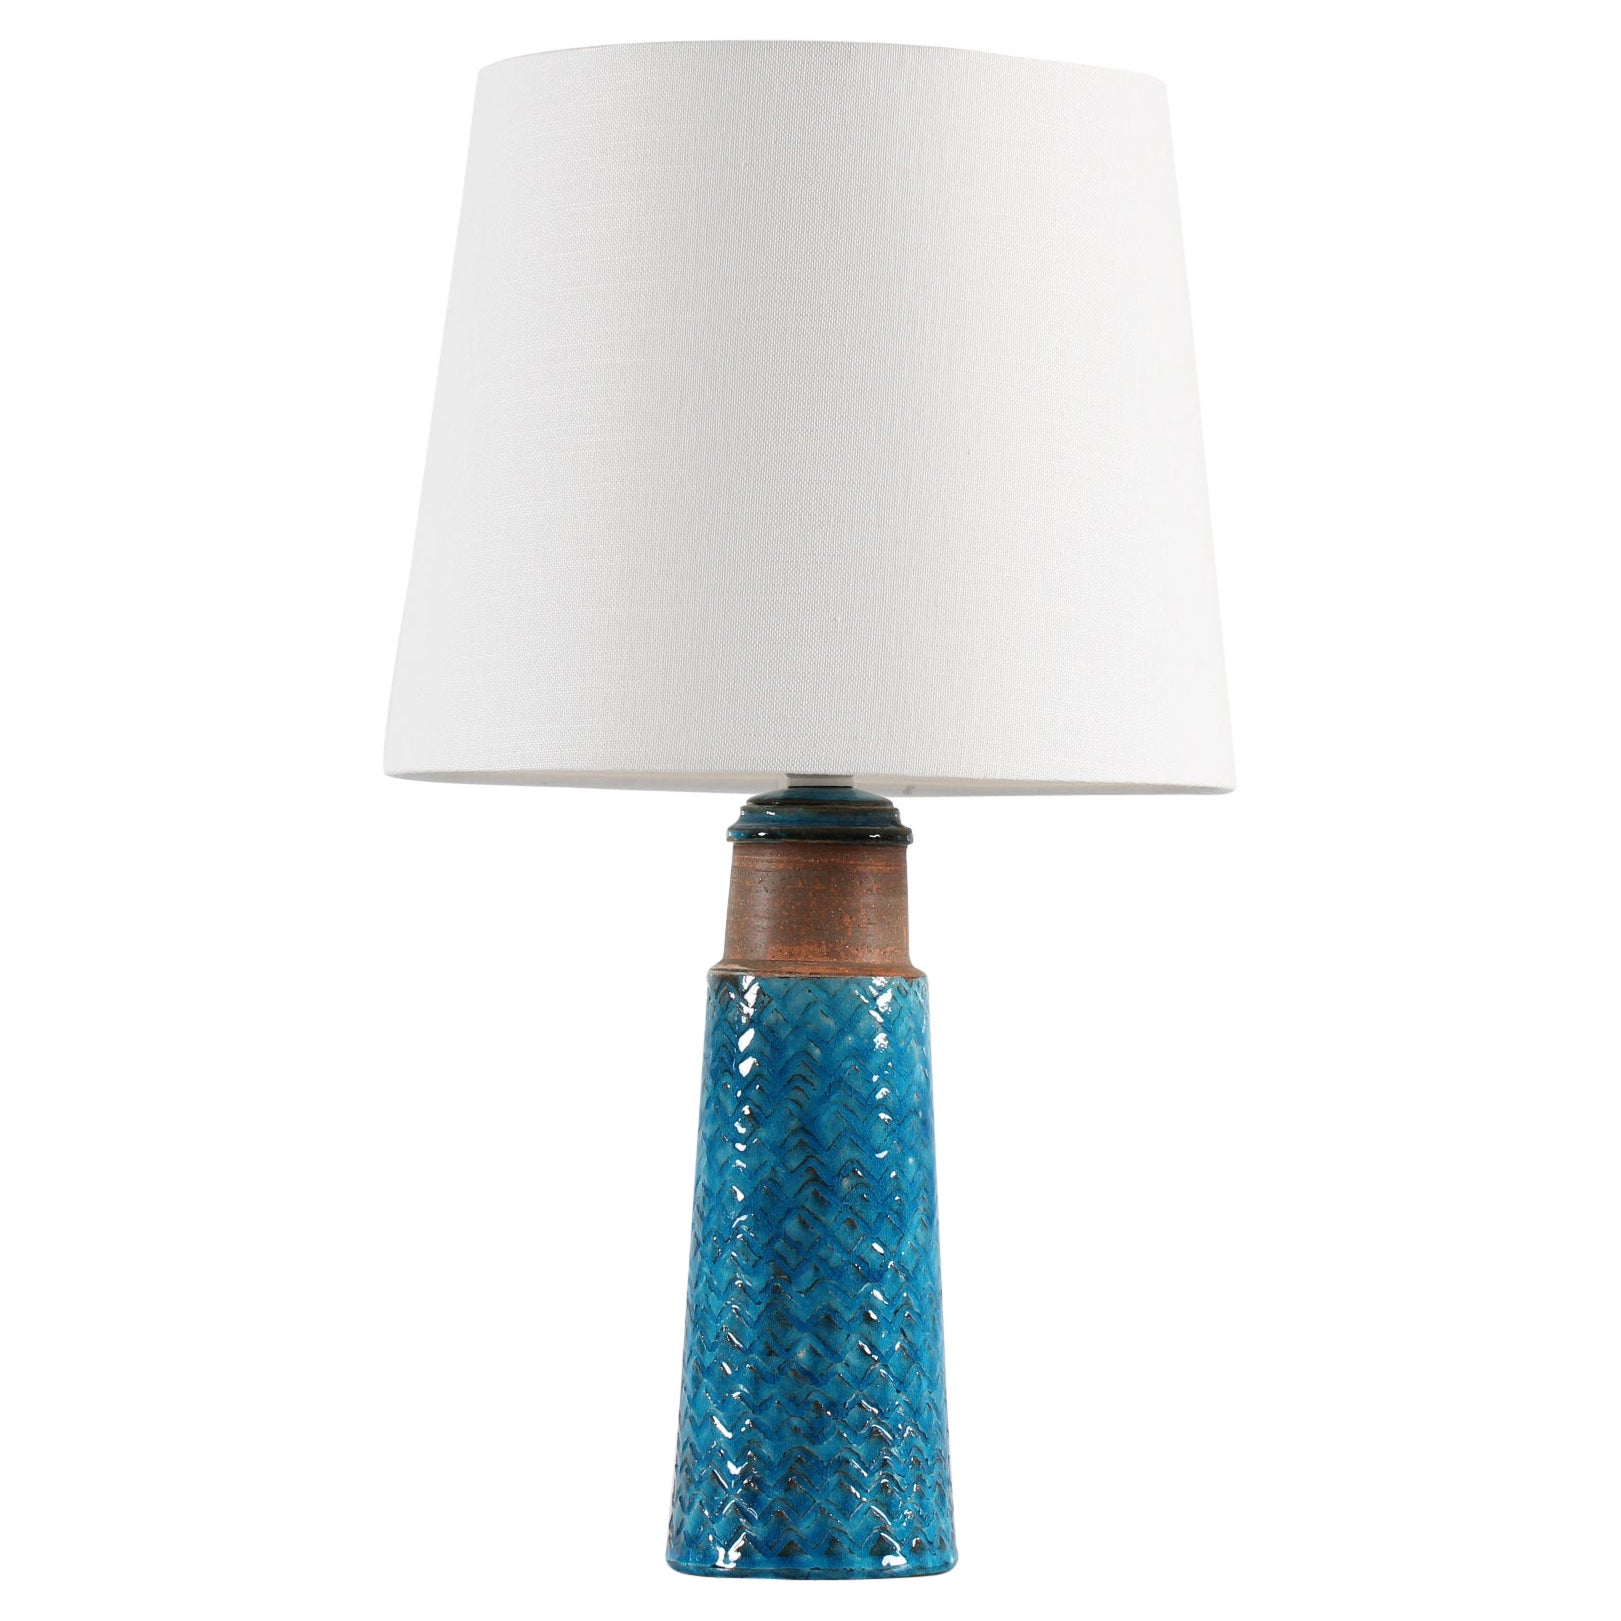 Herman a Kähler Table Lamp with Turquoise Glaze Made in Denmark Mid-Century